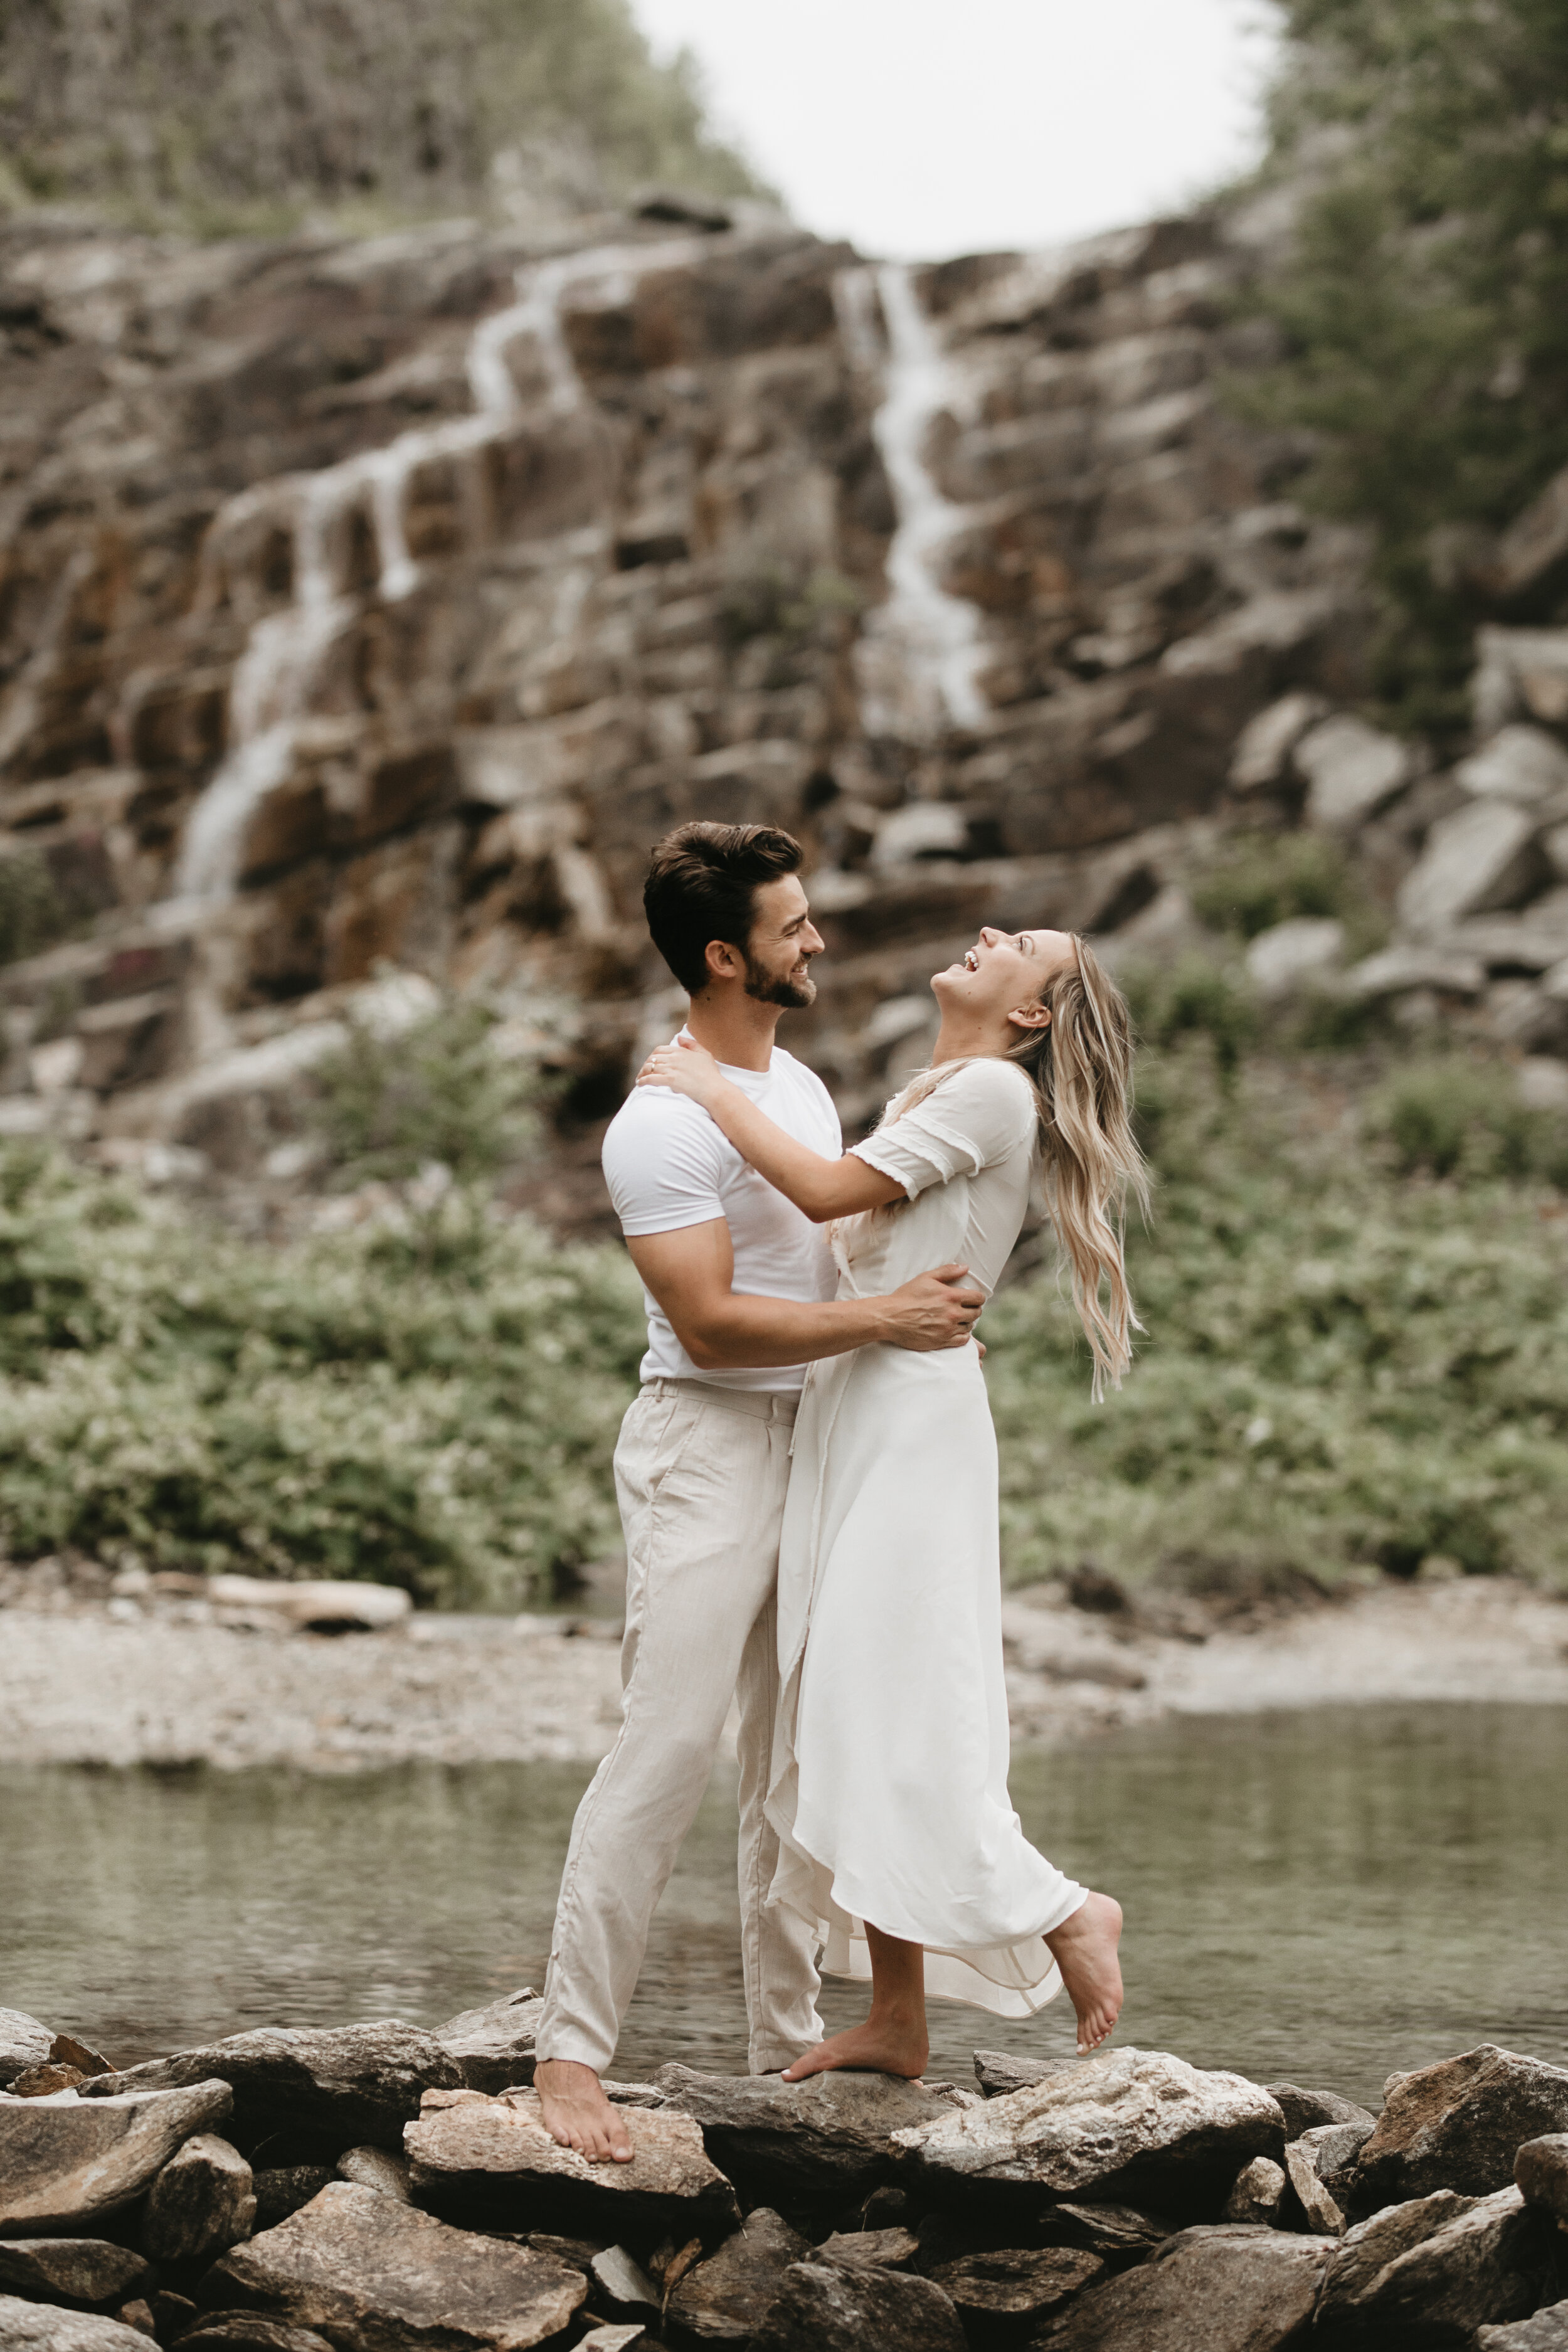 Nicole-Daacke-Photography-michaux-state-forest-elopement-adventure-engagement-session-pennsylvania-elopement-pa-elopement-photographer-gettysburg-photographer-state-park-elopement-engagement-session-pennsylvania-waterfall-161.jpg